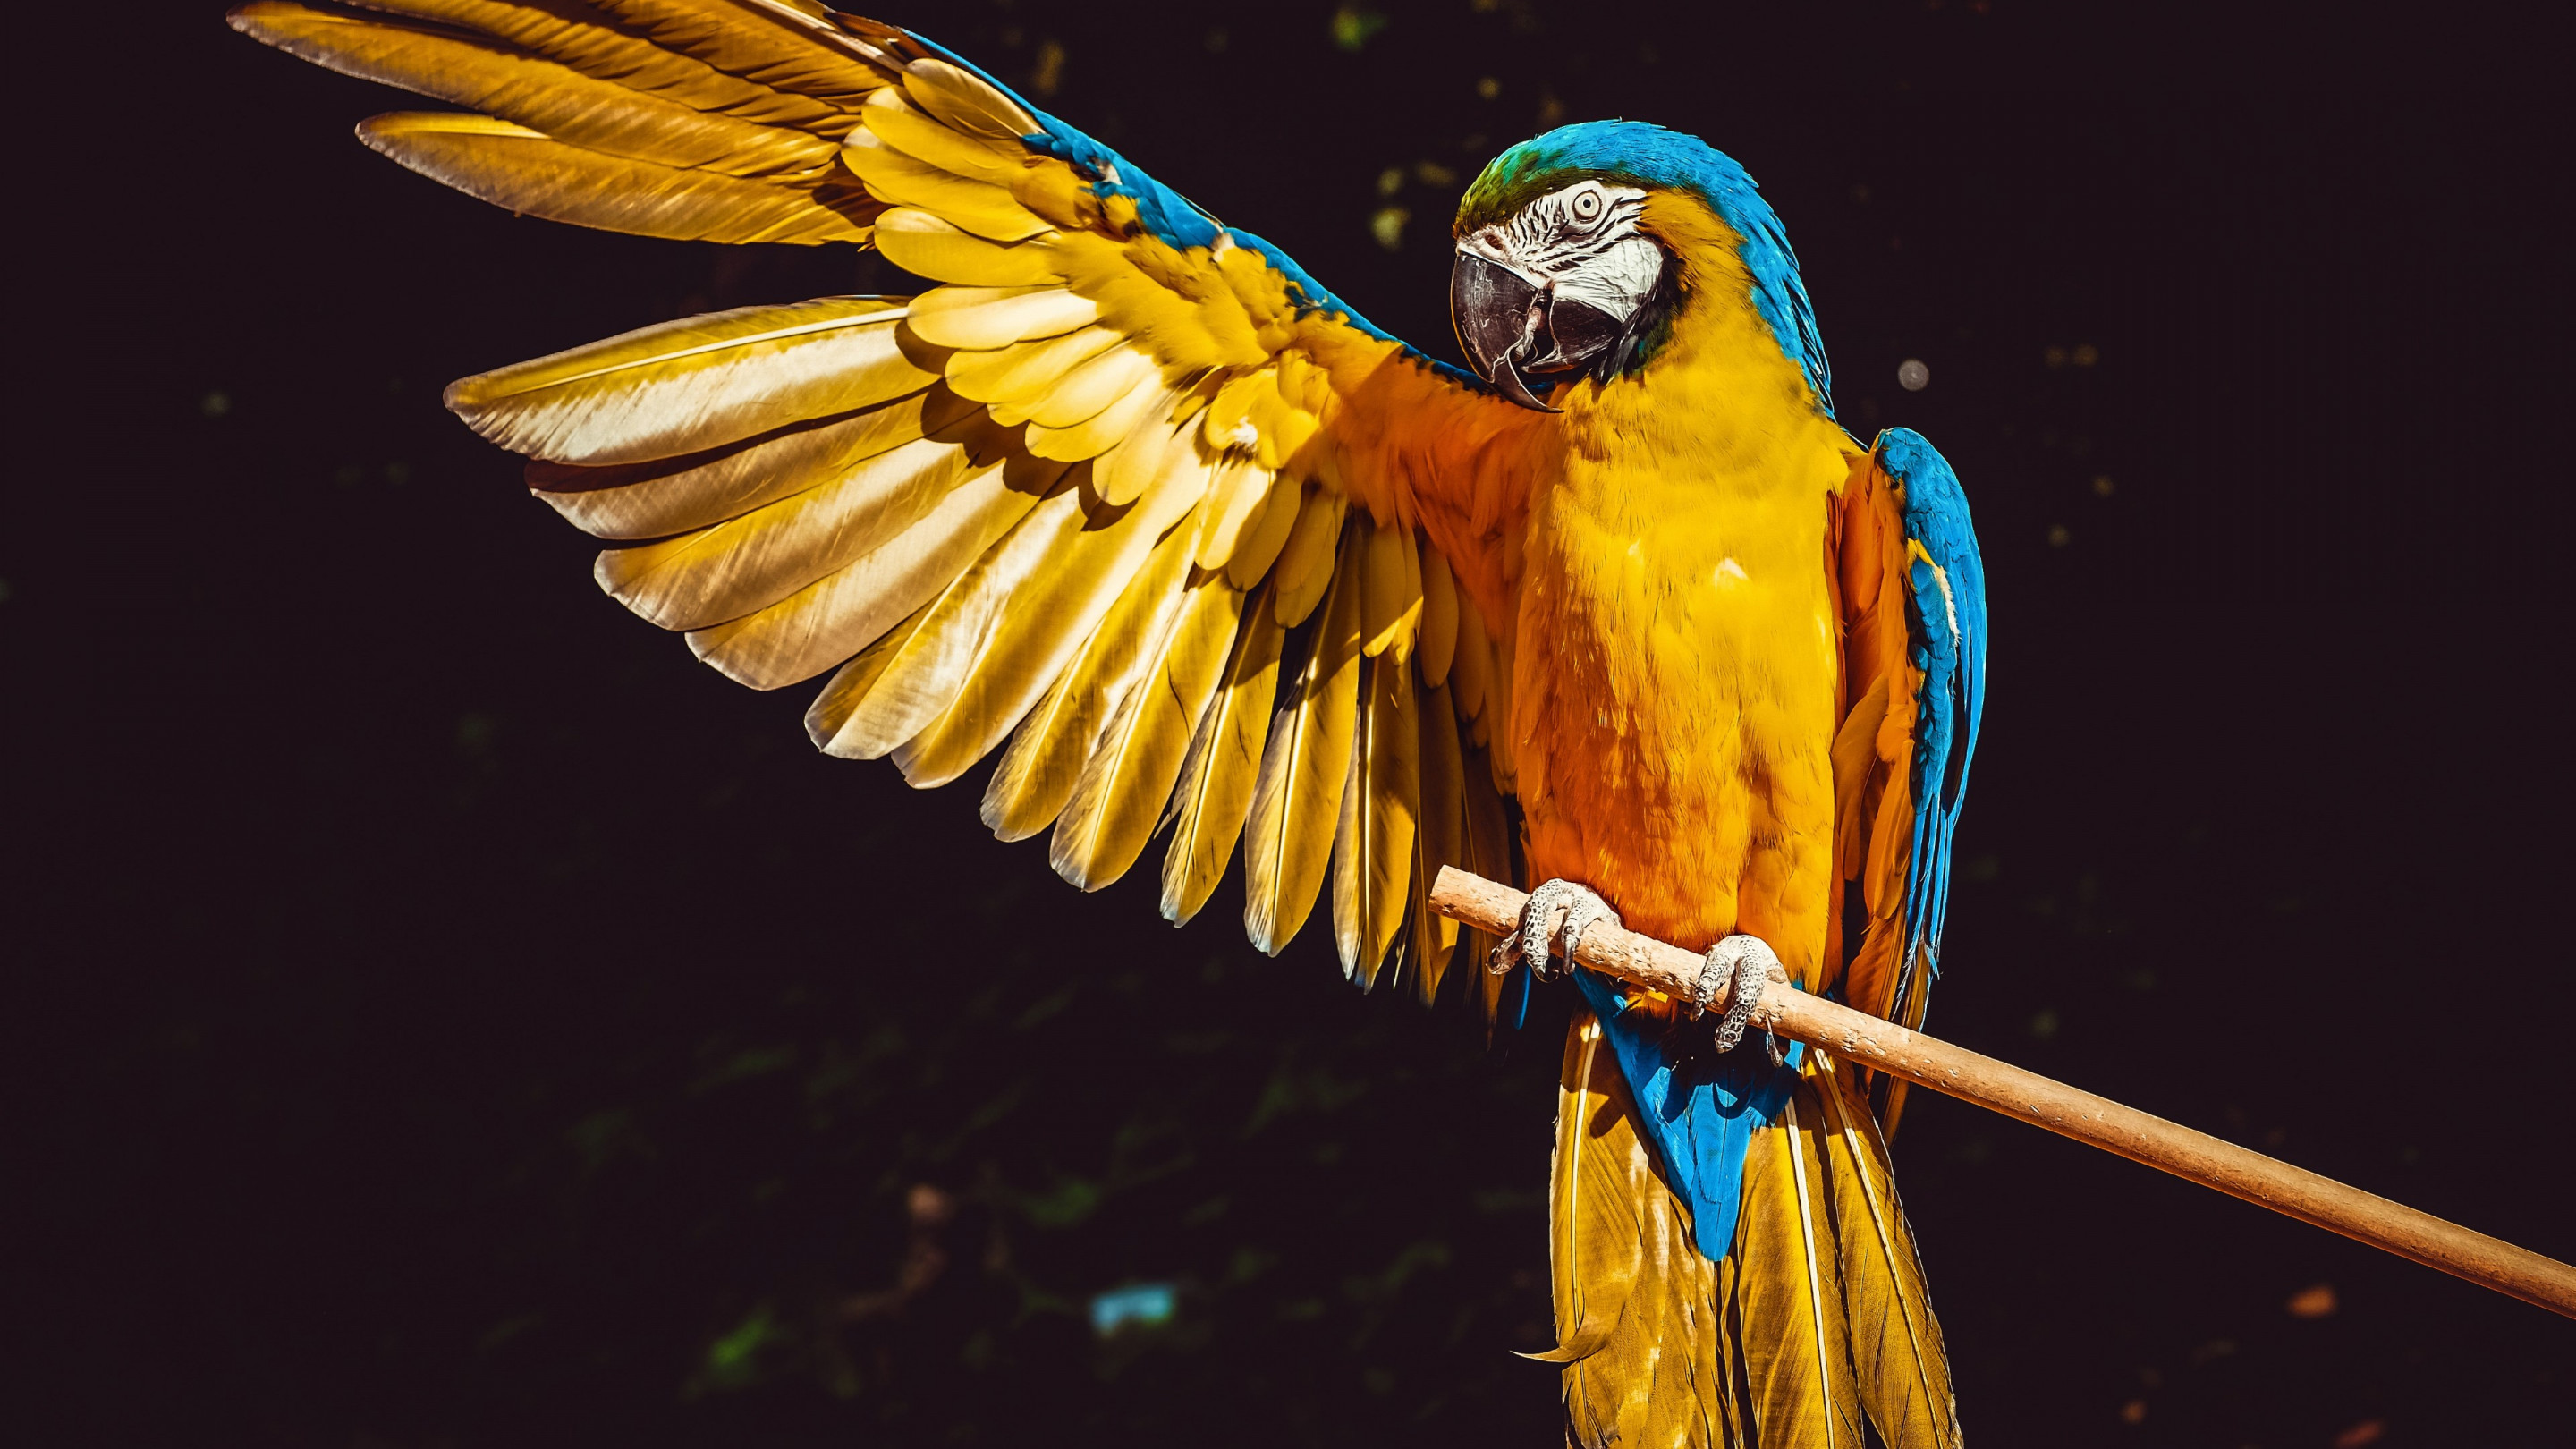 Blue and yellow macaw wallpaper 2880x1620